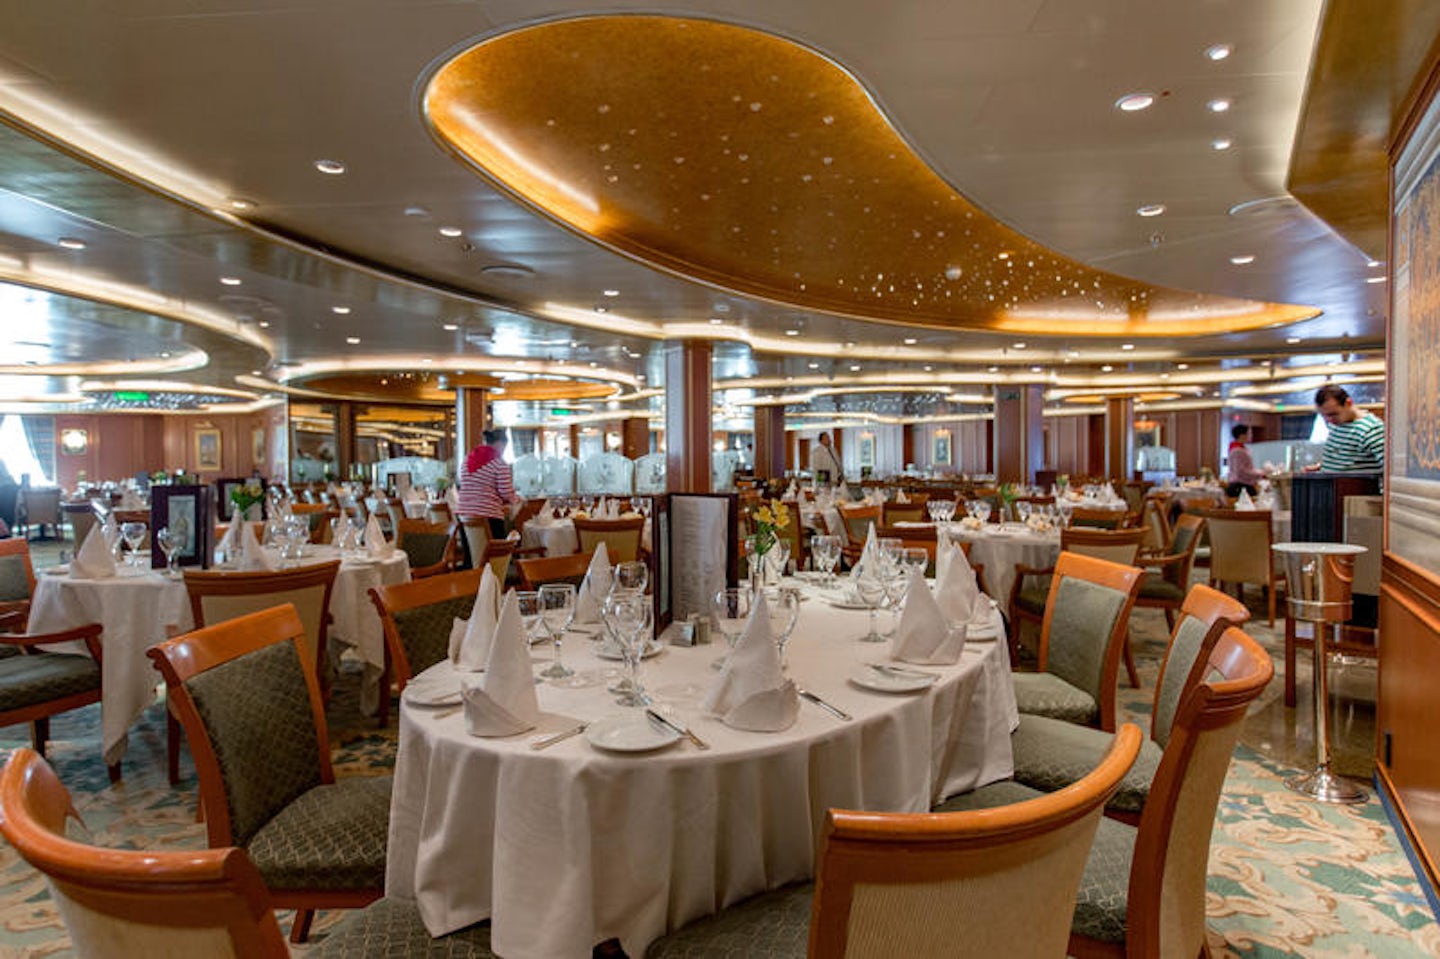 Botticelli Dining Room on Ruby Princess Cruise Ship Cruise Critic